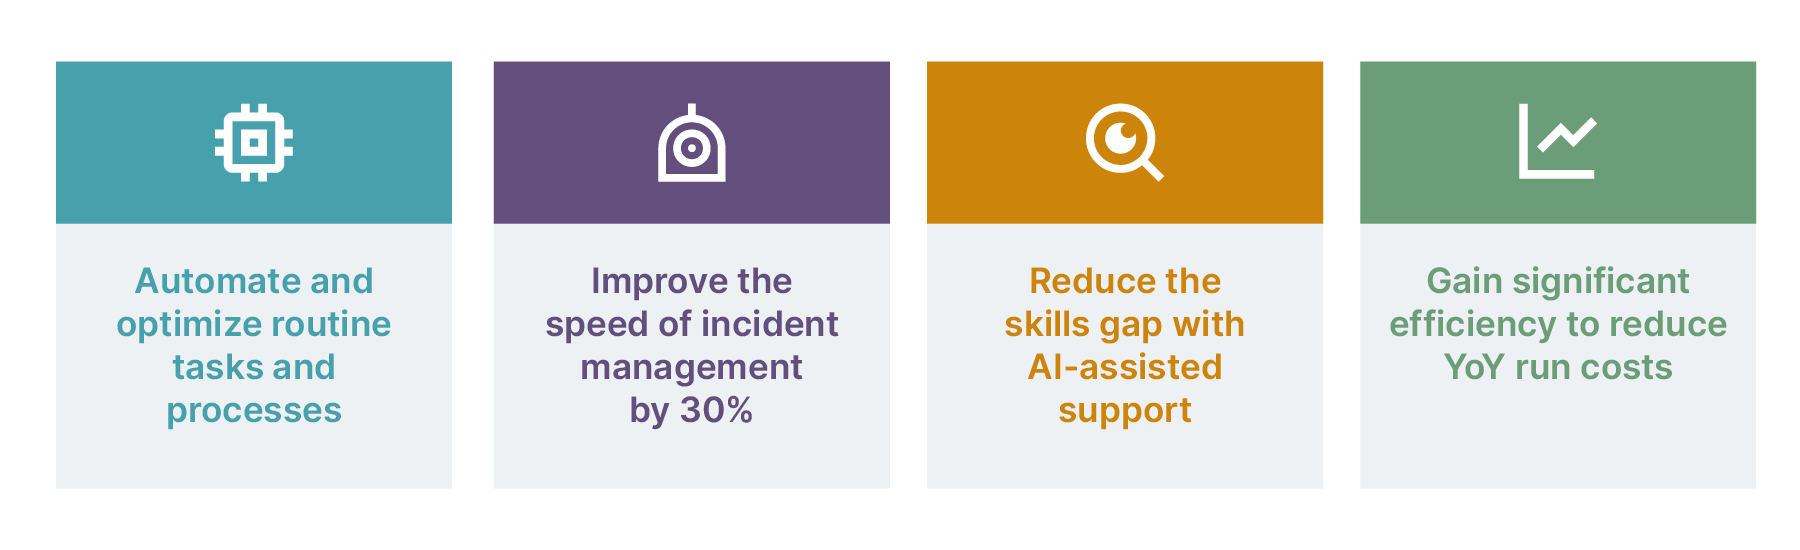 A table highlights the benefits of AI-powered managed services, including automating and optimizing routine tasks, improving incident management by 30%, reducing the skills gap with AI-assisted support and gaining significant efficiency to reduce YOY run costs 